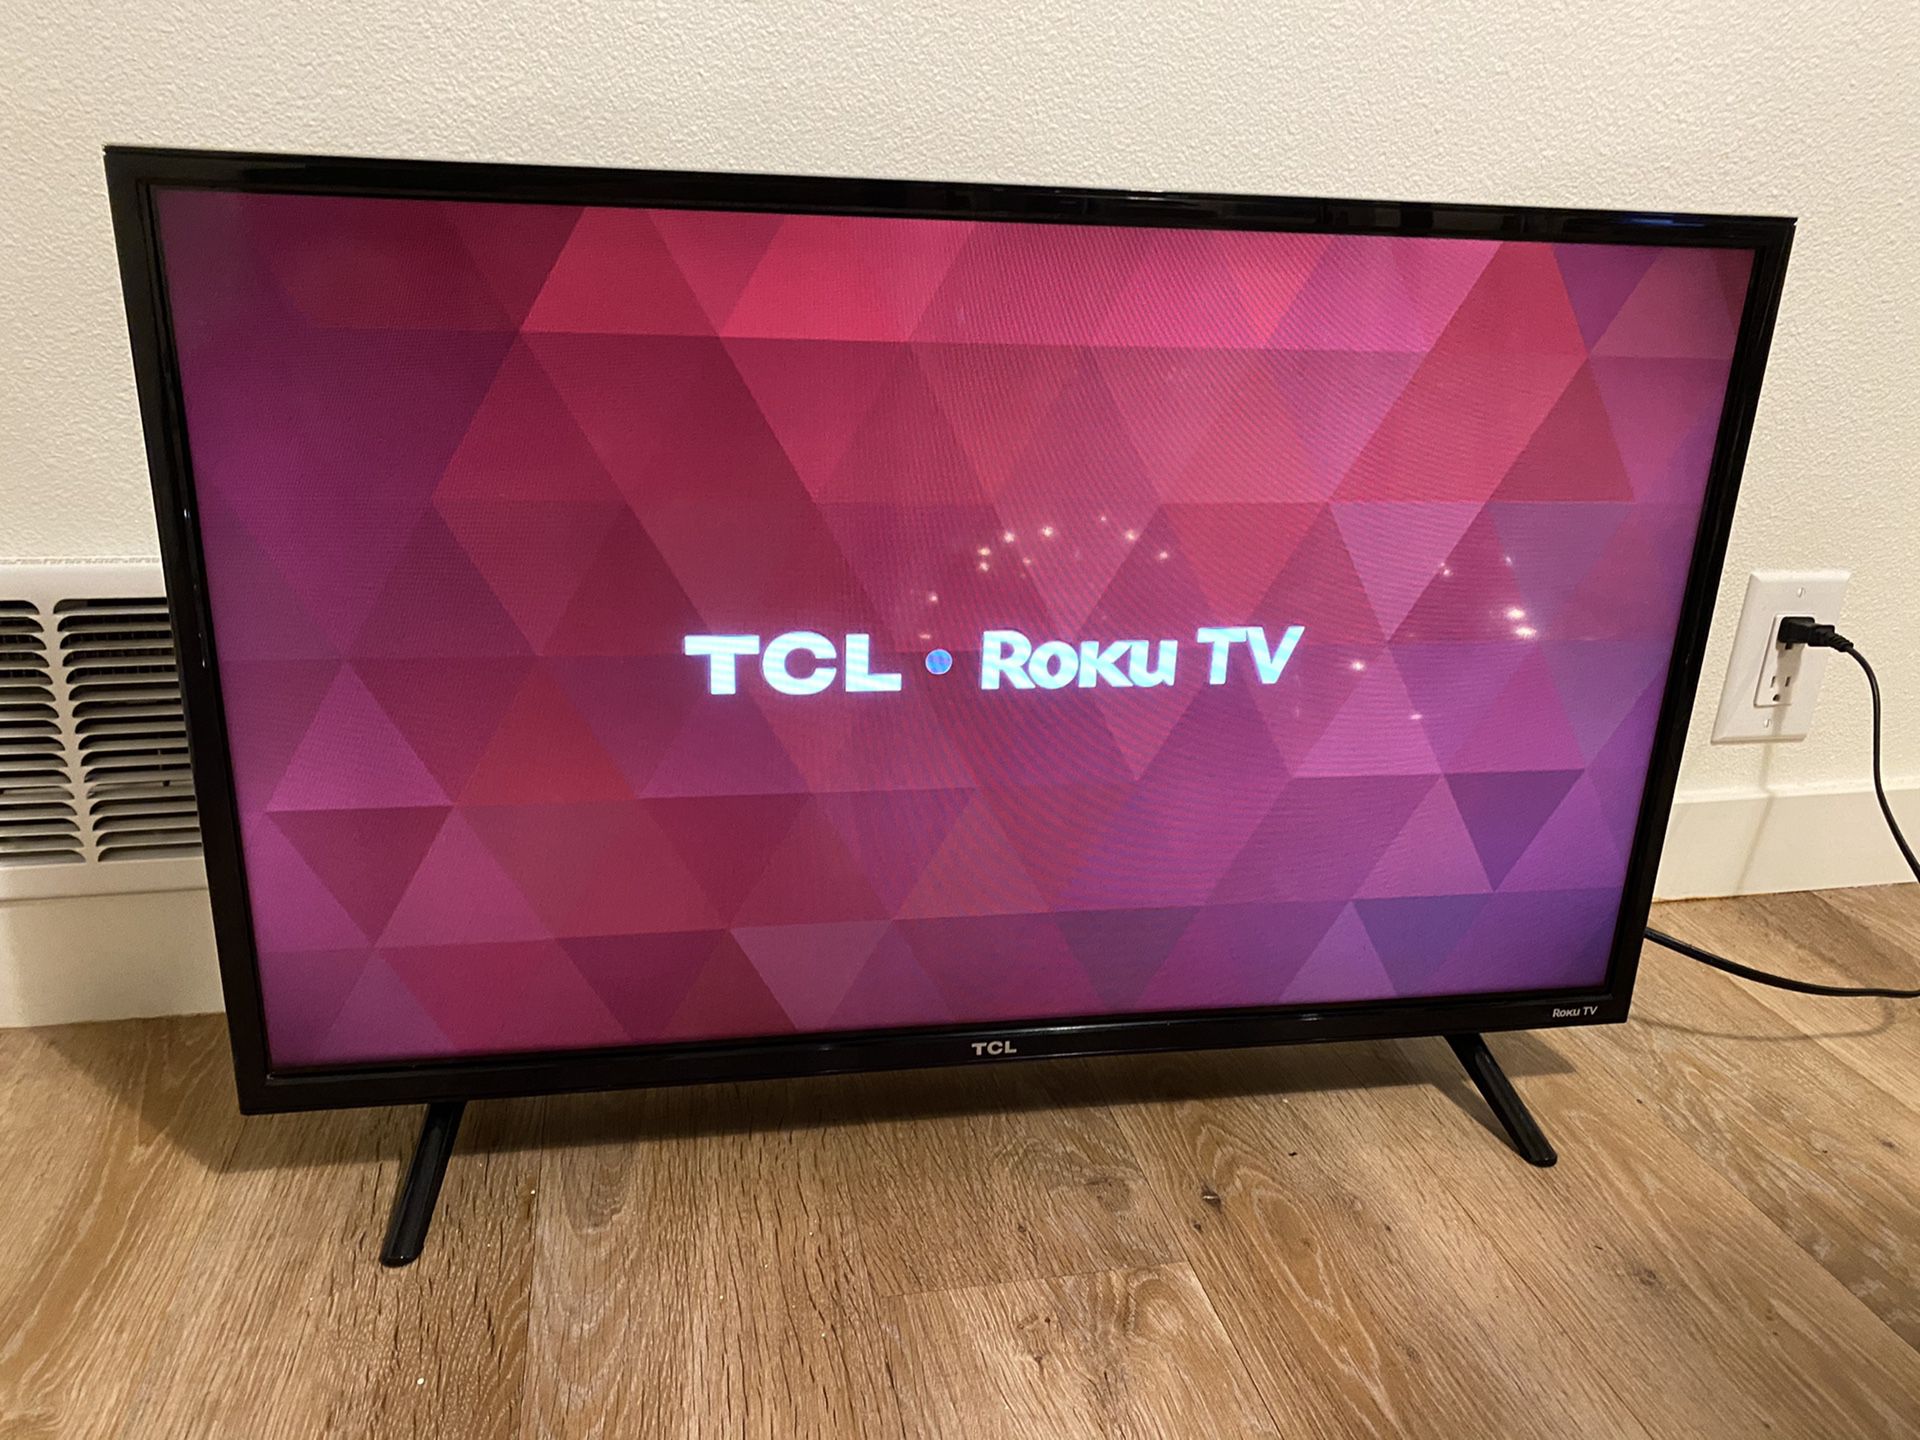 32 inch brand new TCL tv with roku included.